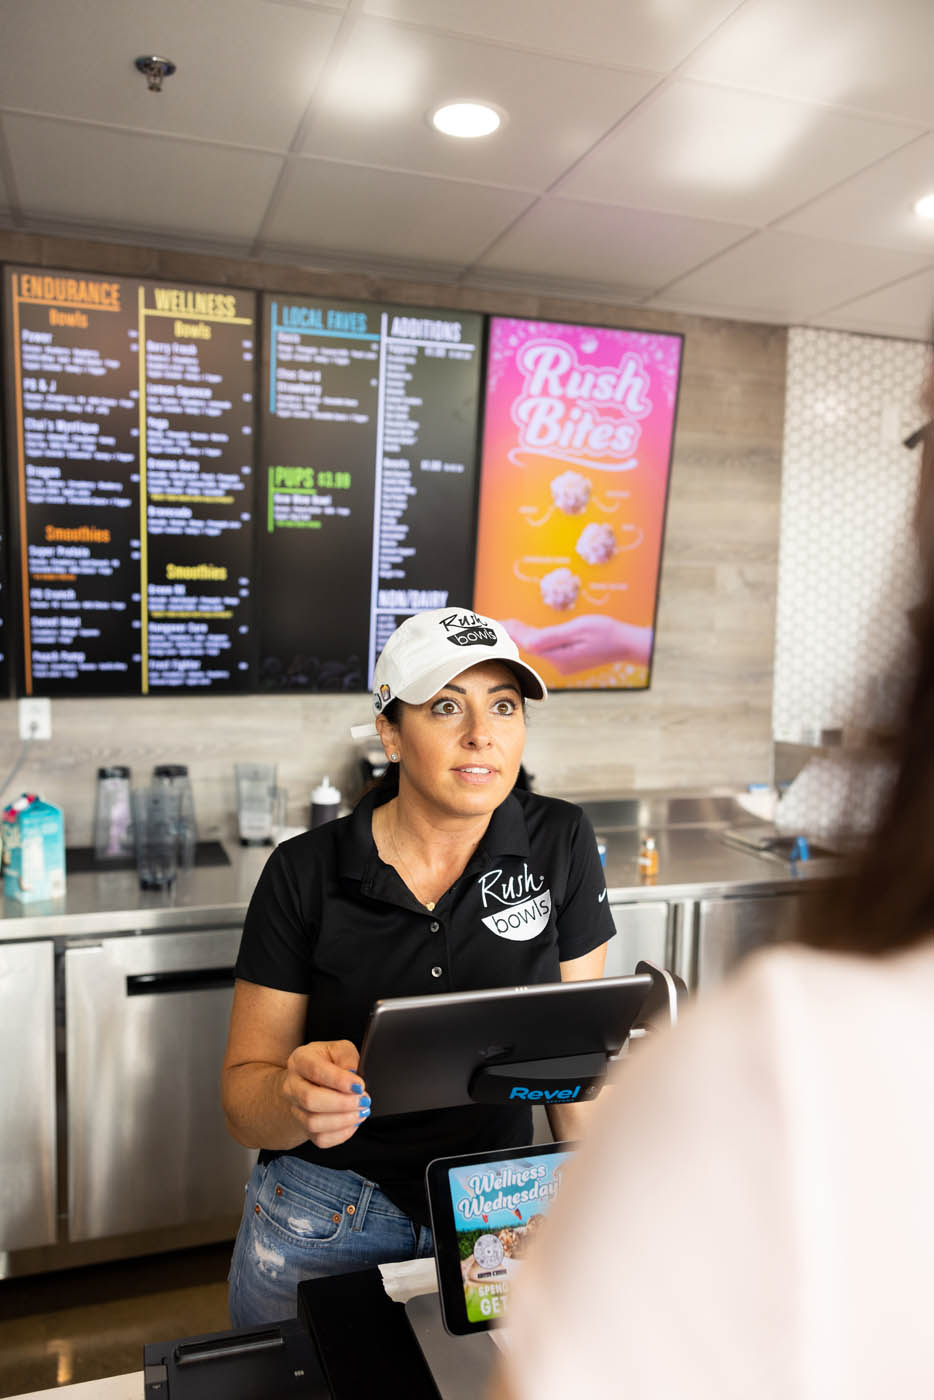 A Rush Bowls worker helping costumers choose and order their favorite flavors from our amazing menu!